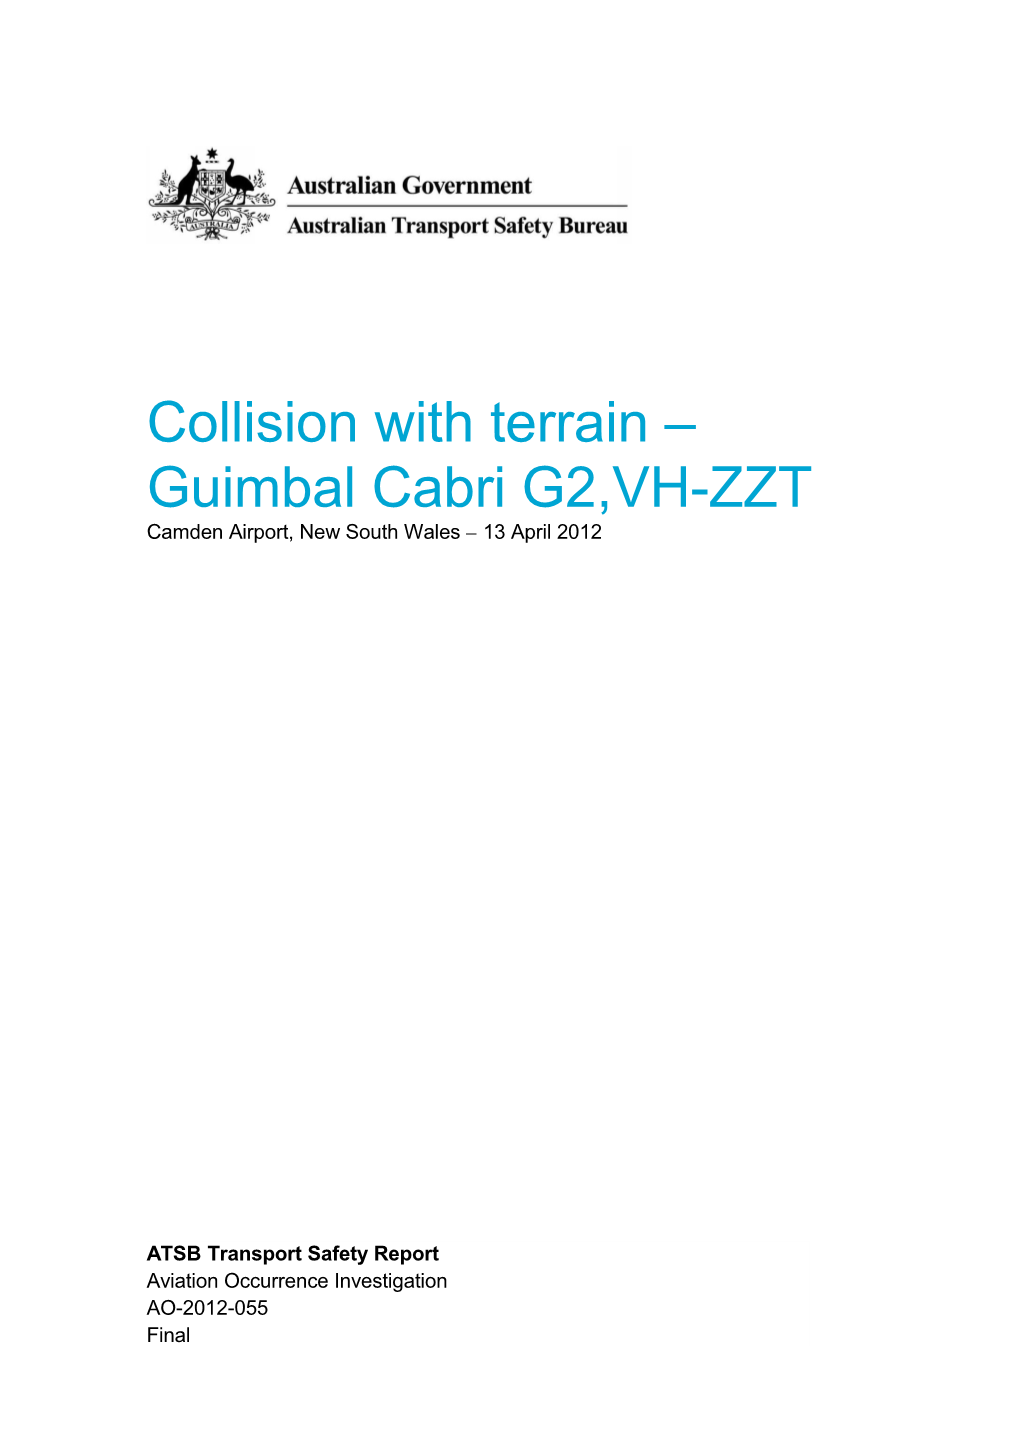 Collision with Terrain